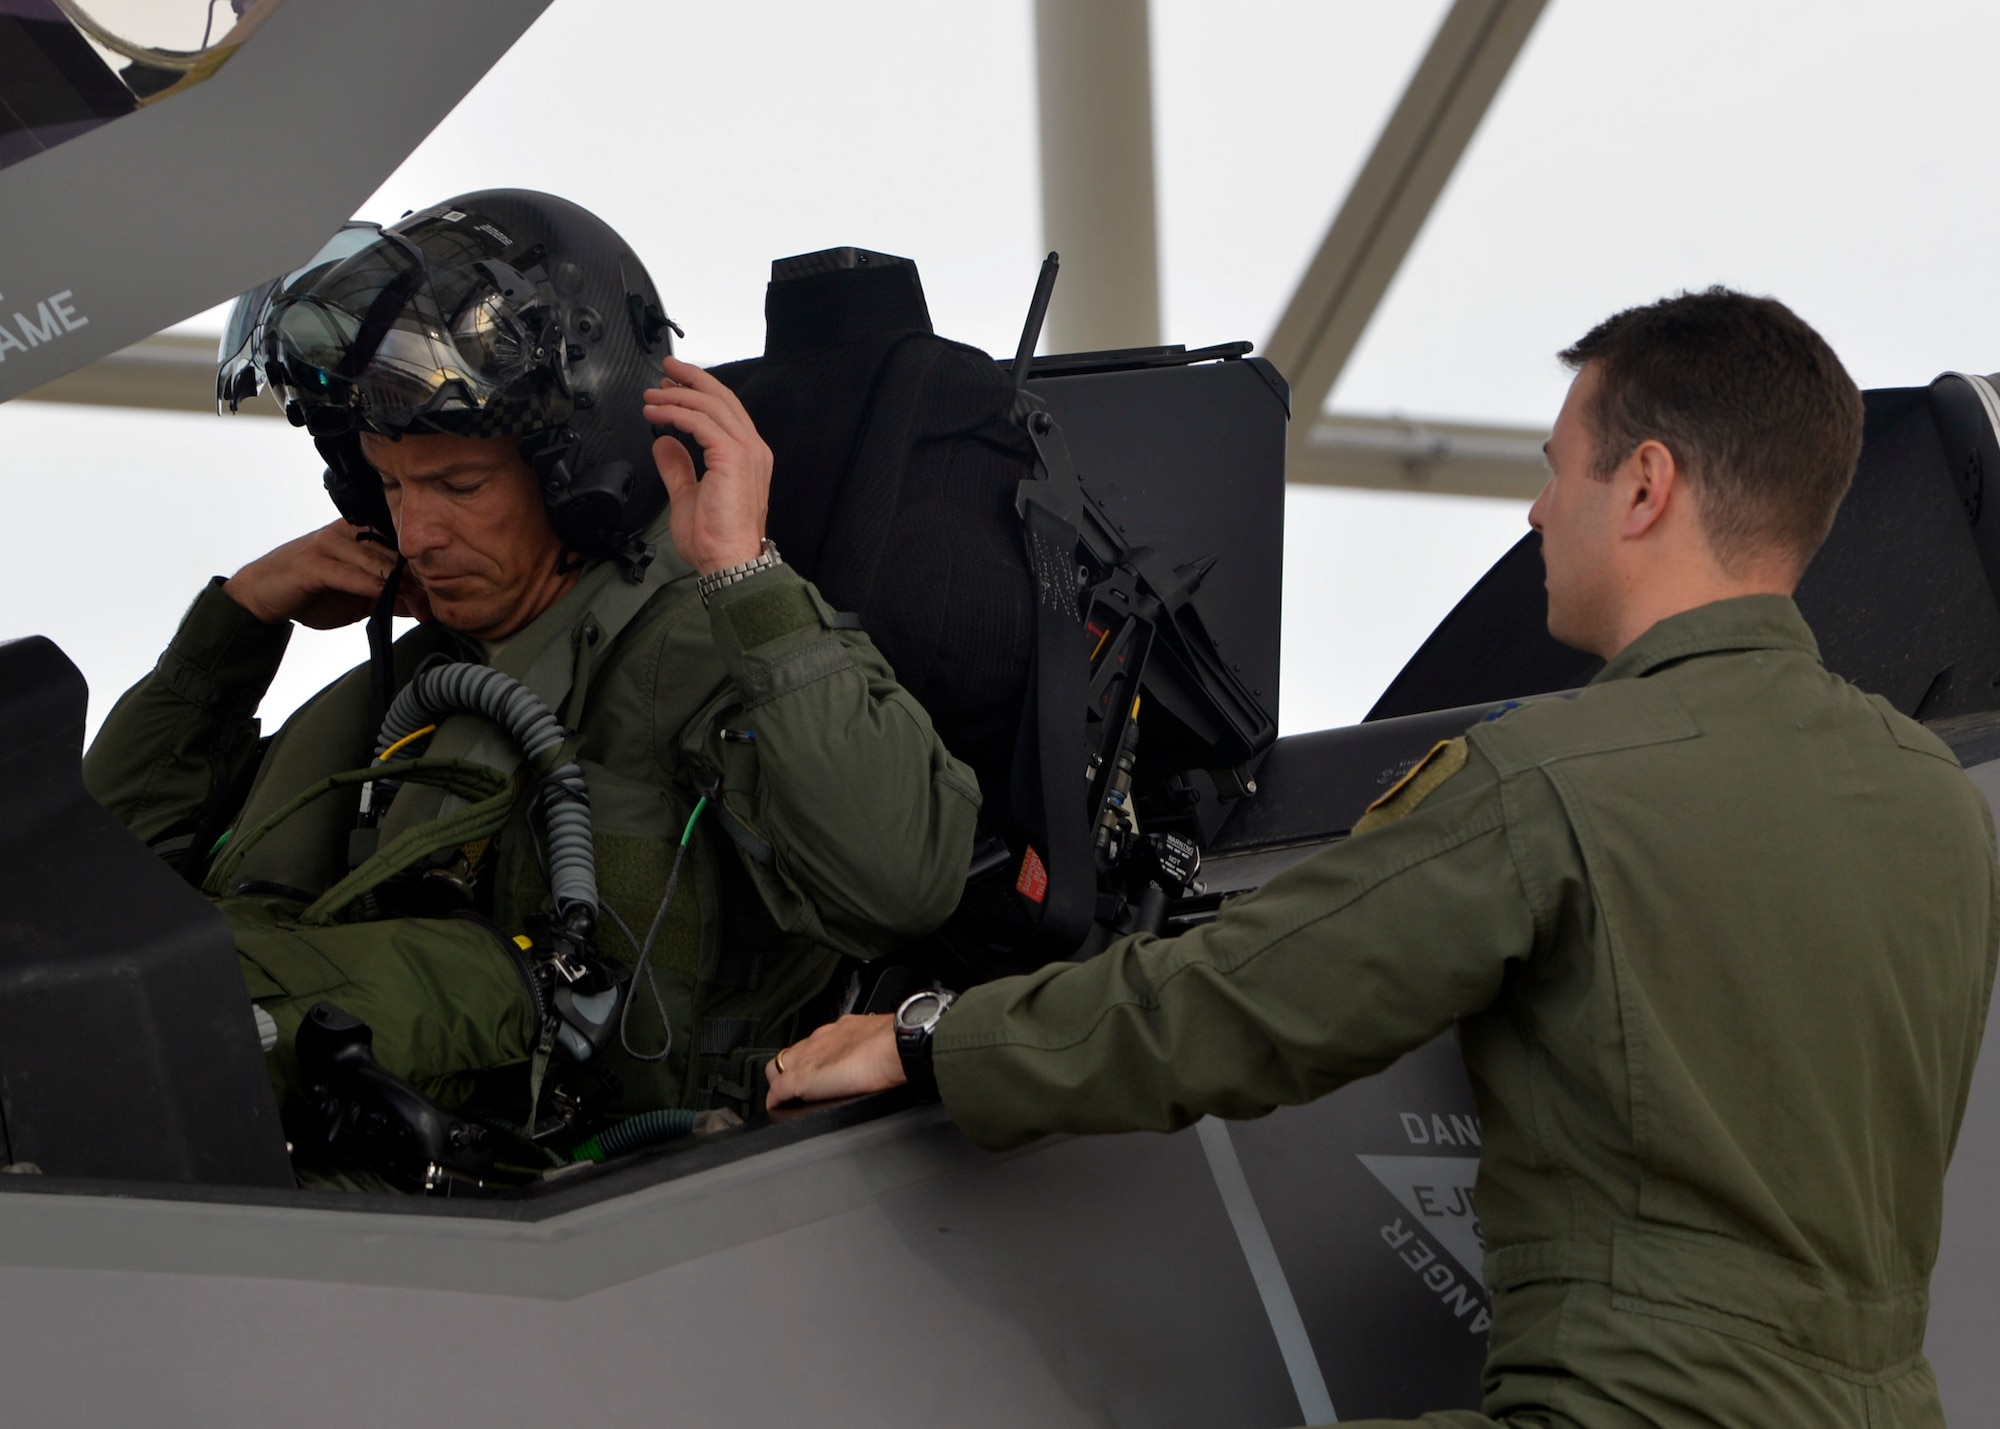 Brig. Gen. Scott Pleus dons his helmet before his first F-35 sortie flight March 18, 2015, at Luke Air Force Base, Ariz. Pleus is the commander of the 56th Fighter Wing. Pleus will now be the first commander to switch to the F-35 on Luke AFB. (U.S. Air Force photo/Senior Airman Devante Williams)